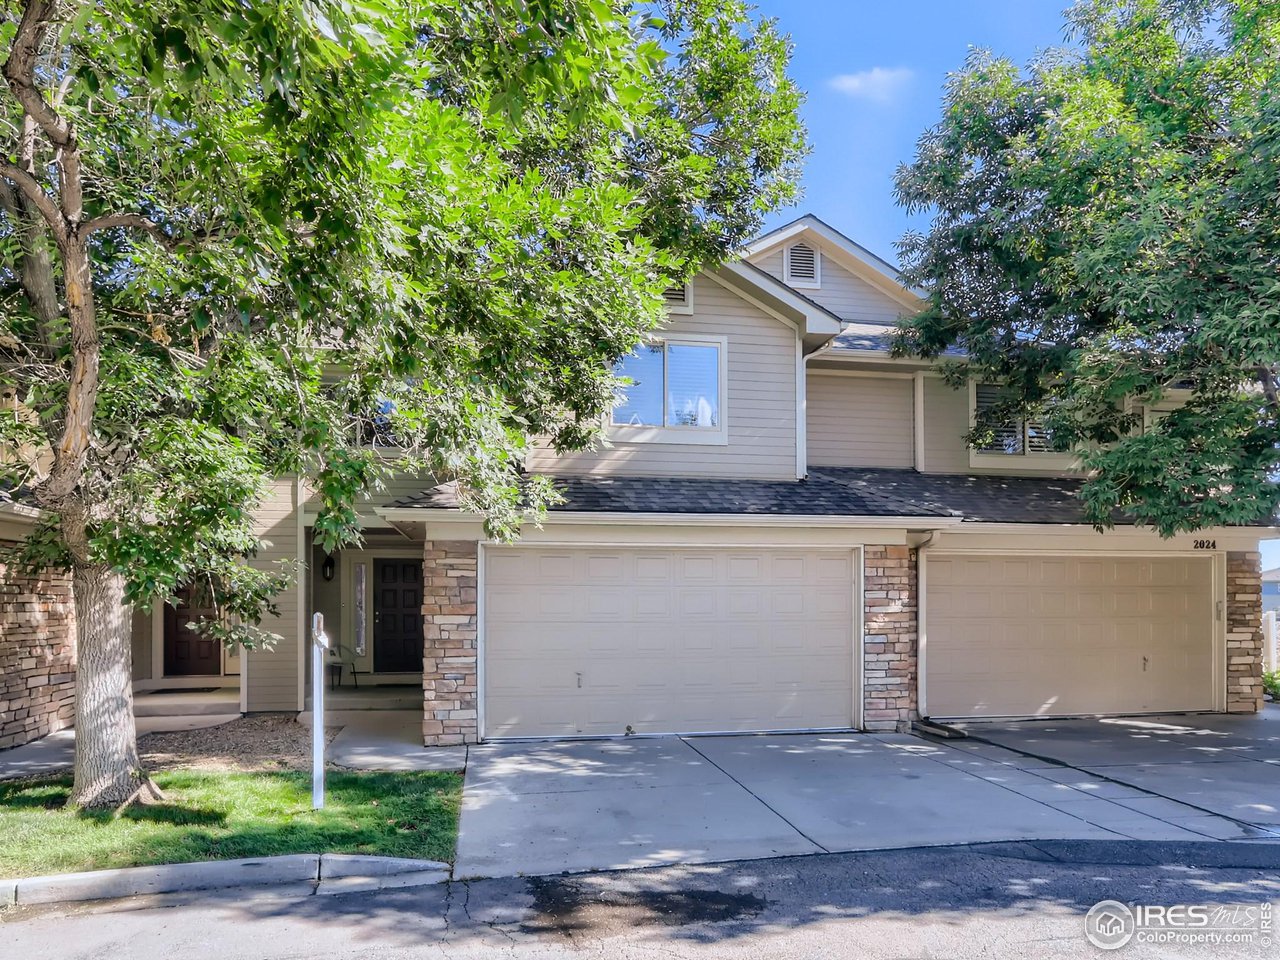 2026 Centennial Drive. Lovely HOA Community with mature trees and fabulous location.